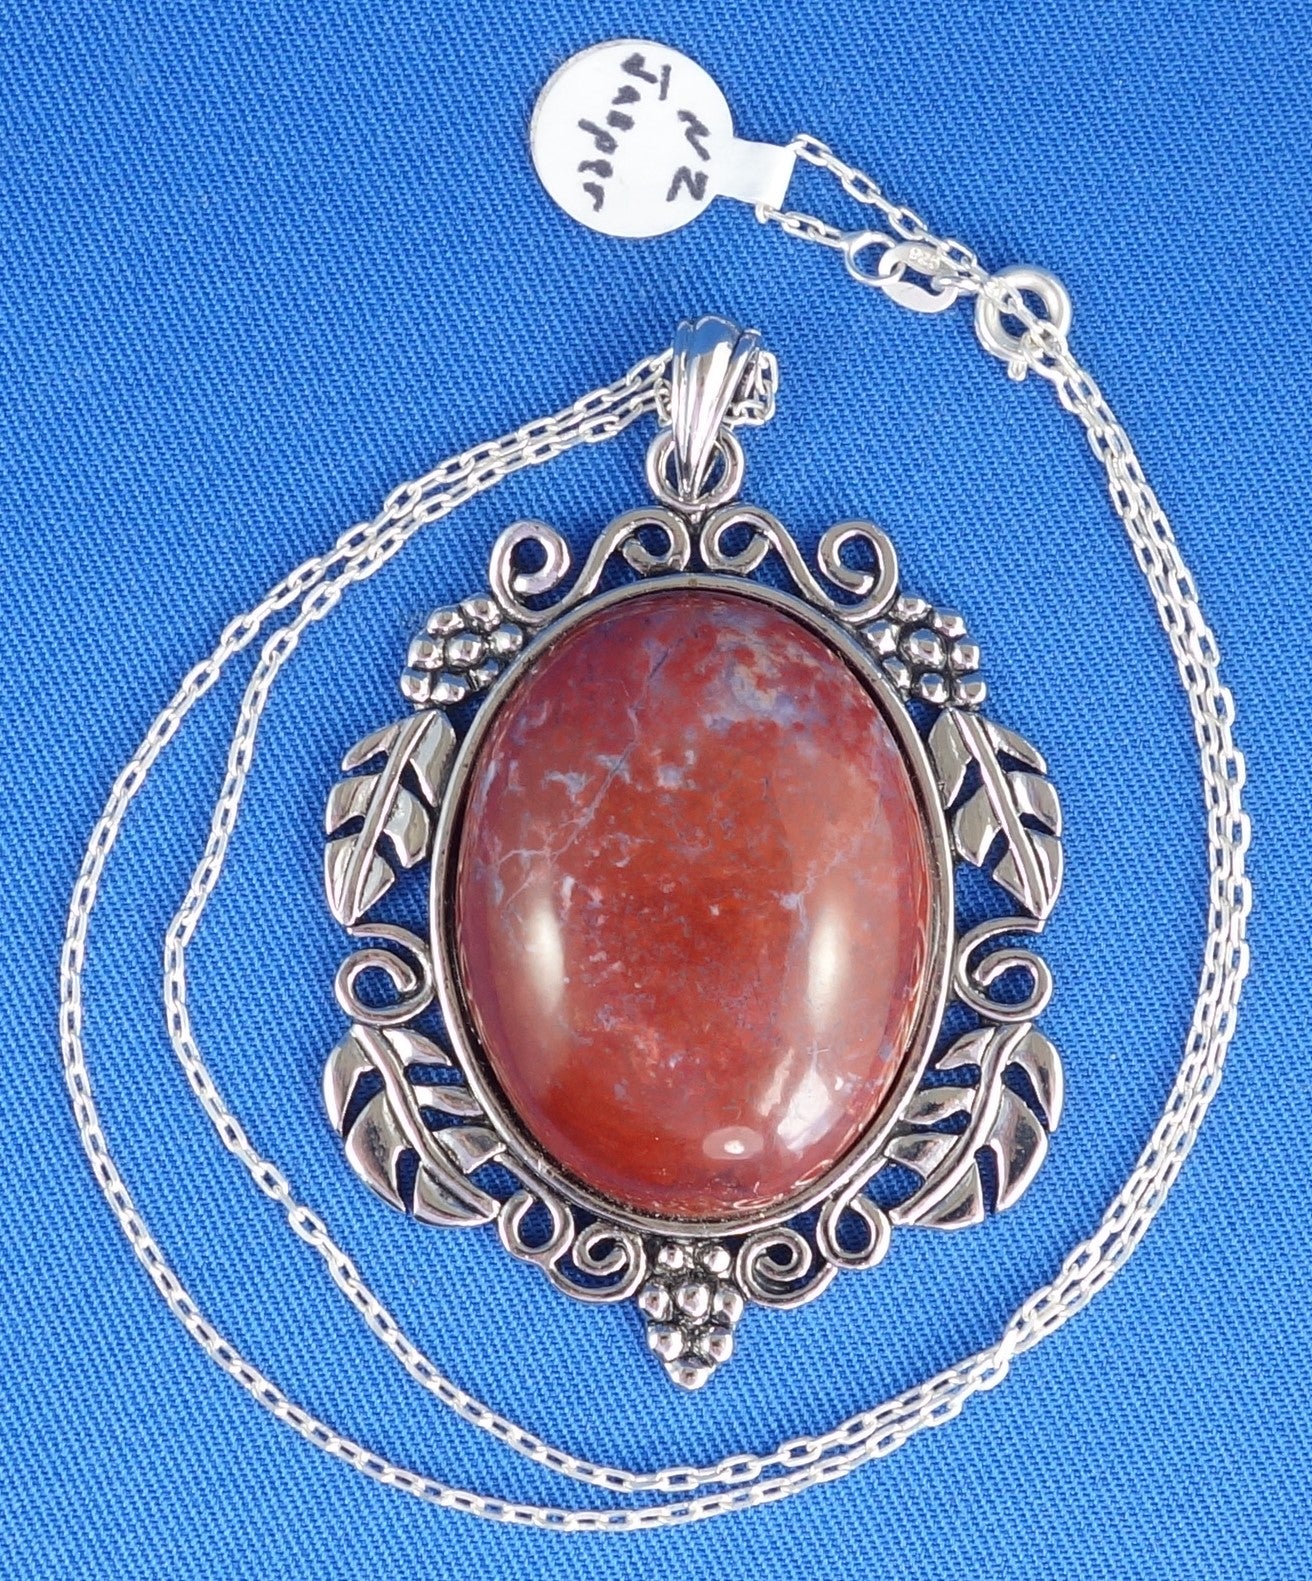 Necklace with a brilliant red jasper that I collected from the West Branch of the Tairua River in Coromandel Peninsula with speckles of blue chalcedony and all the colours of the chakrahs. This stone is hand polished into a 40x30mm cabochon and set in a silver plated setting with 19 inch chain. As you study the subtle speckles and swirls you can see the main grounding red, orange, yellow, pink, blue and white.